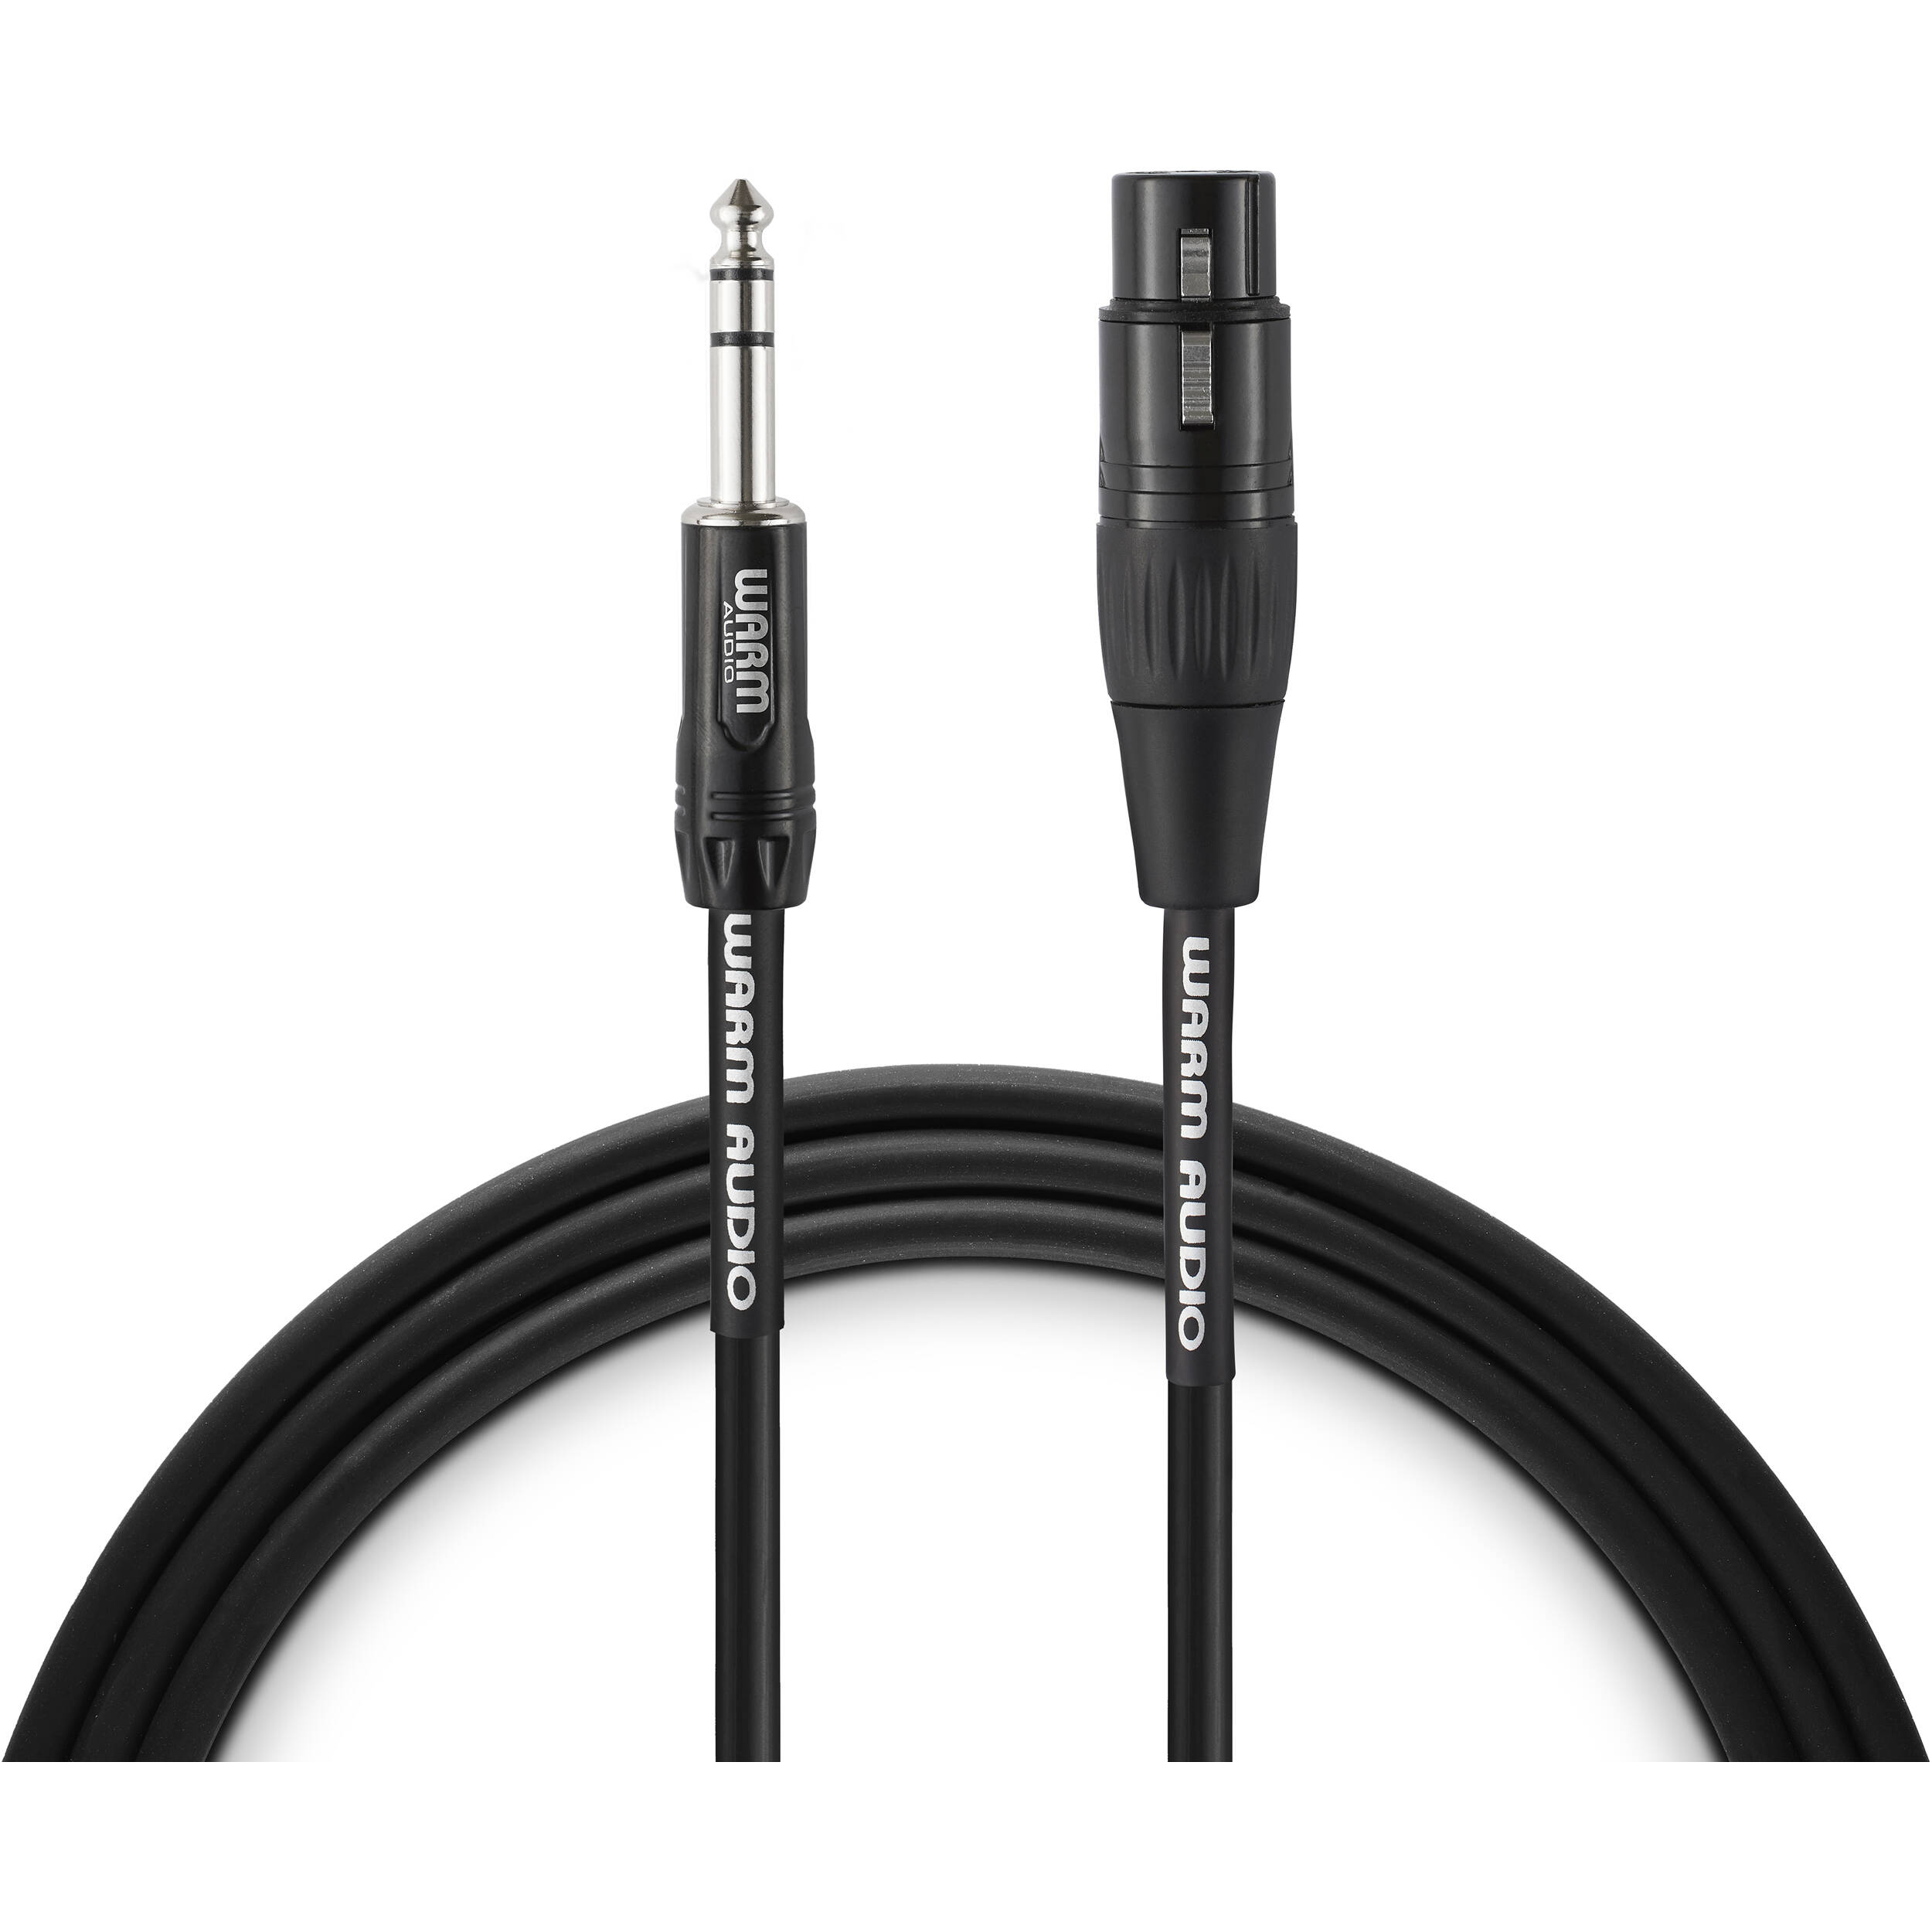 Warm Audio Pro Silver XLR Female to TRS Male Cable - 3-foot